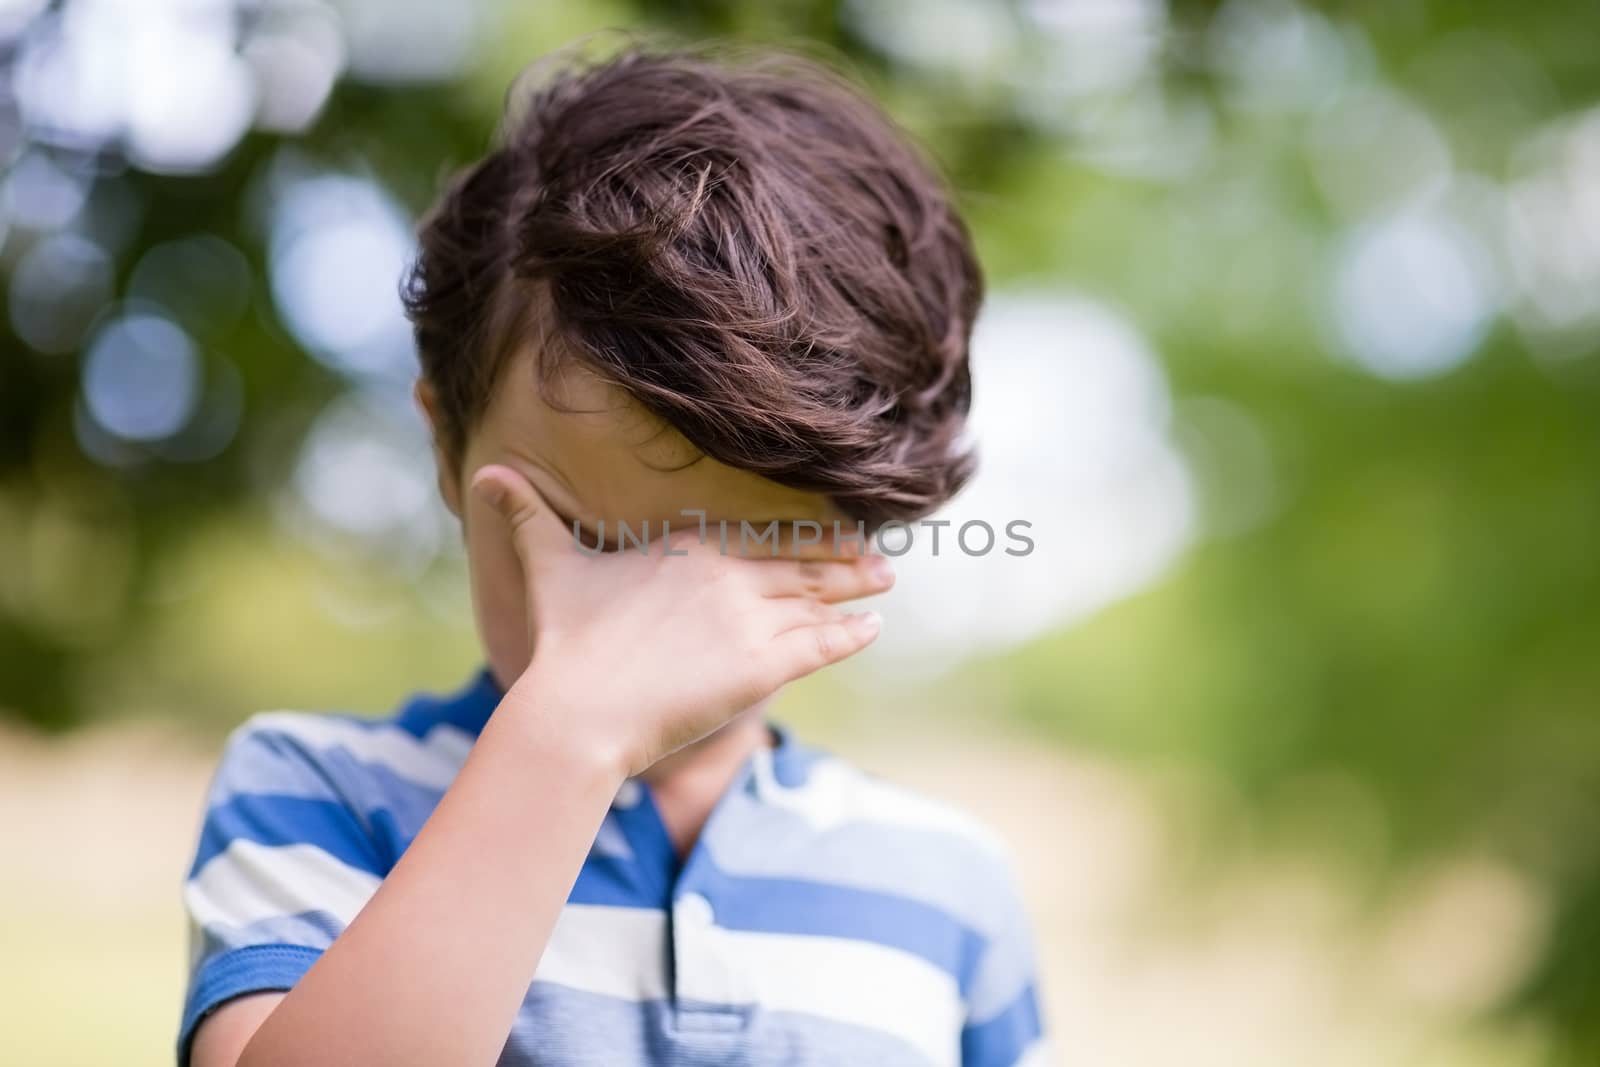 Boy covering eyes with hand in park on a sunny day